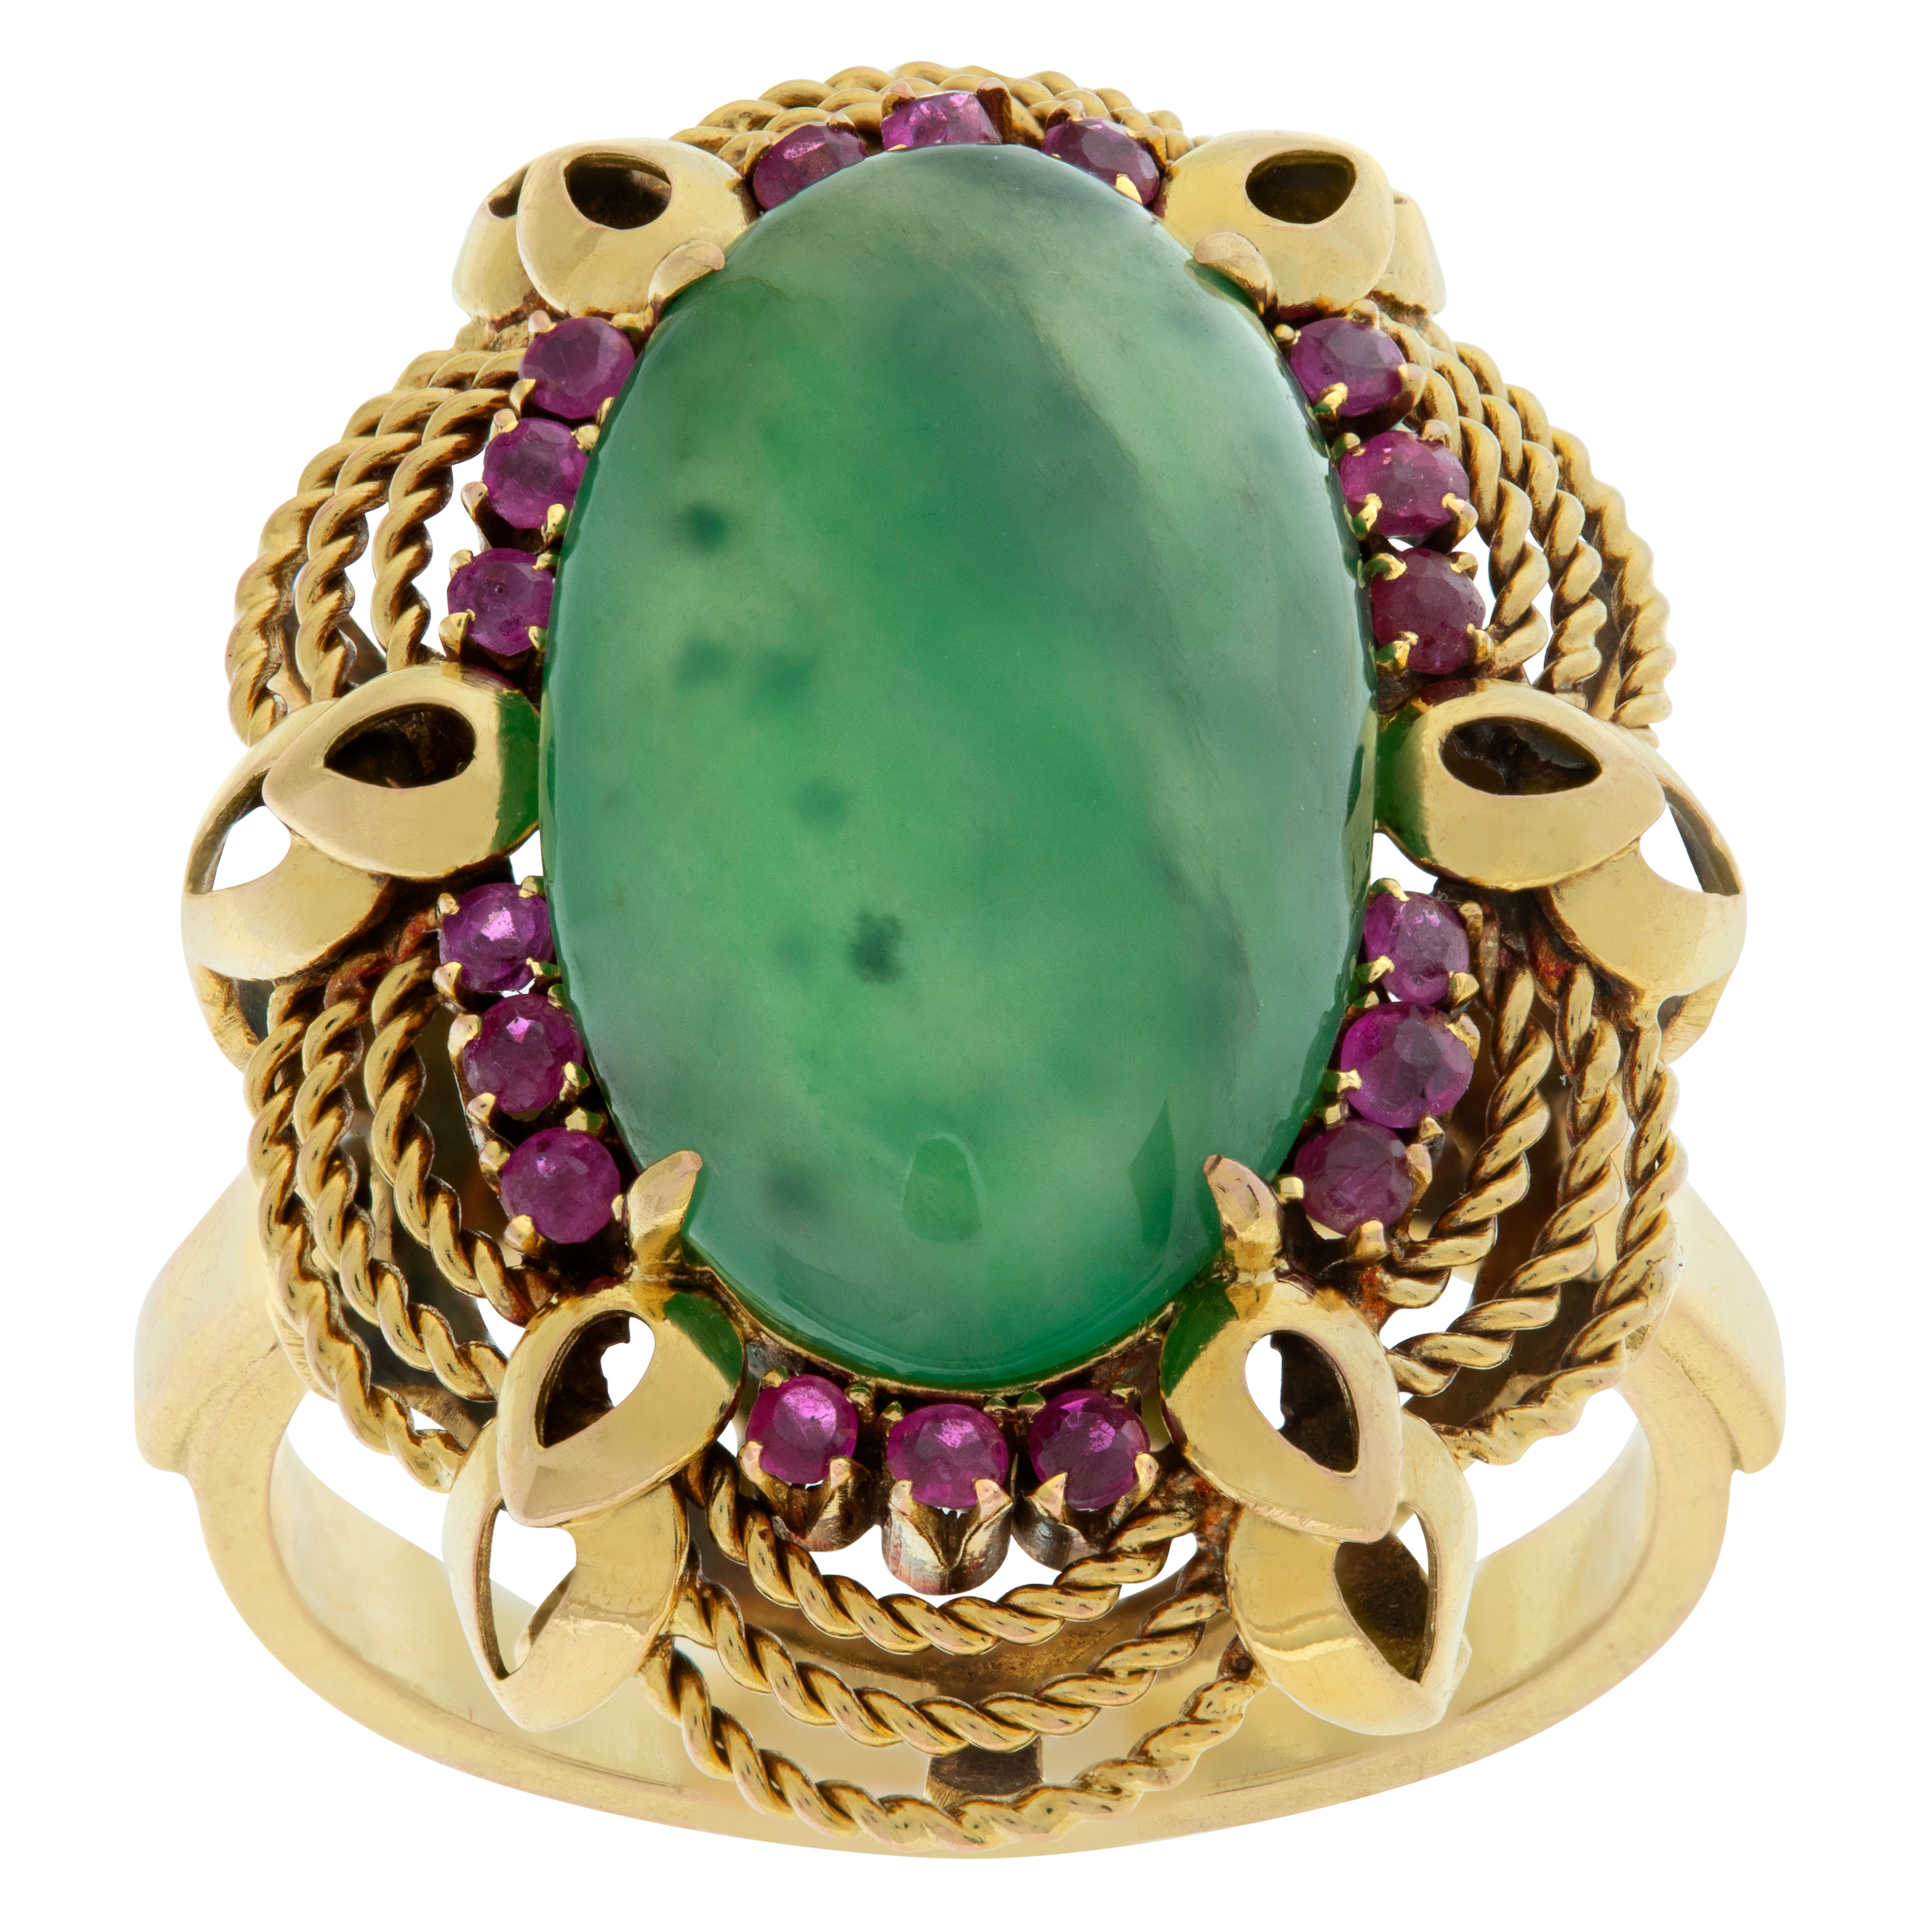 Vintage Oval Cut Cabochon Jade & Rubies Ring In 14k Yellow Gold image 1